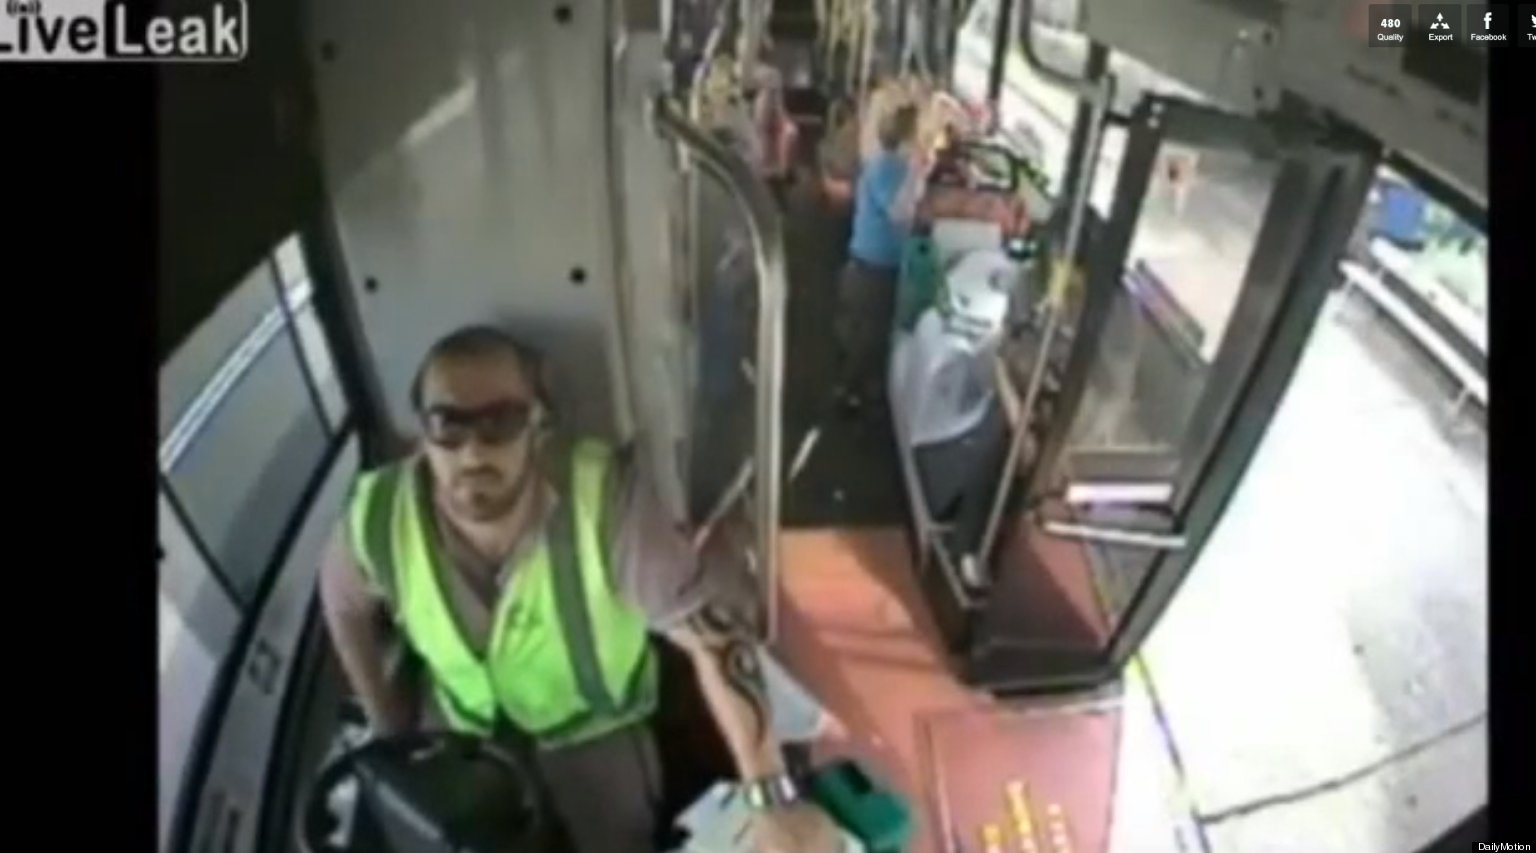 Hero Bus Driver Amar Wahid Saves Passenger After She Stops Breathing On 